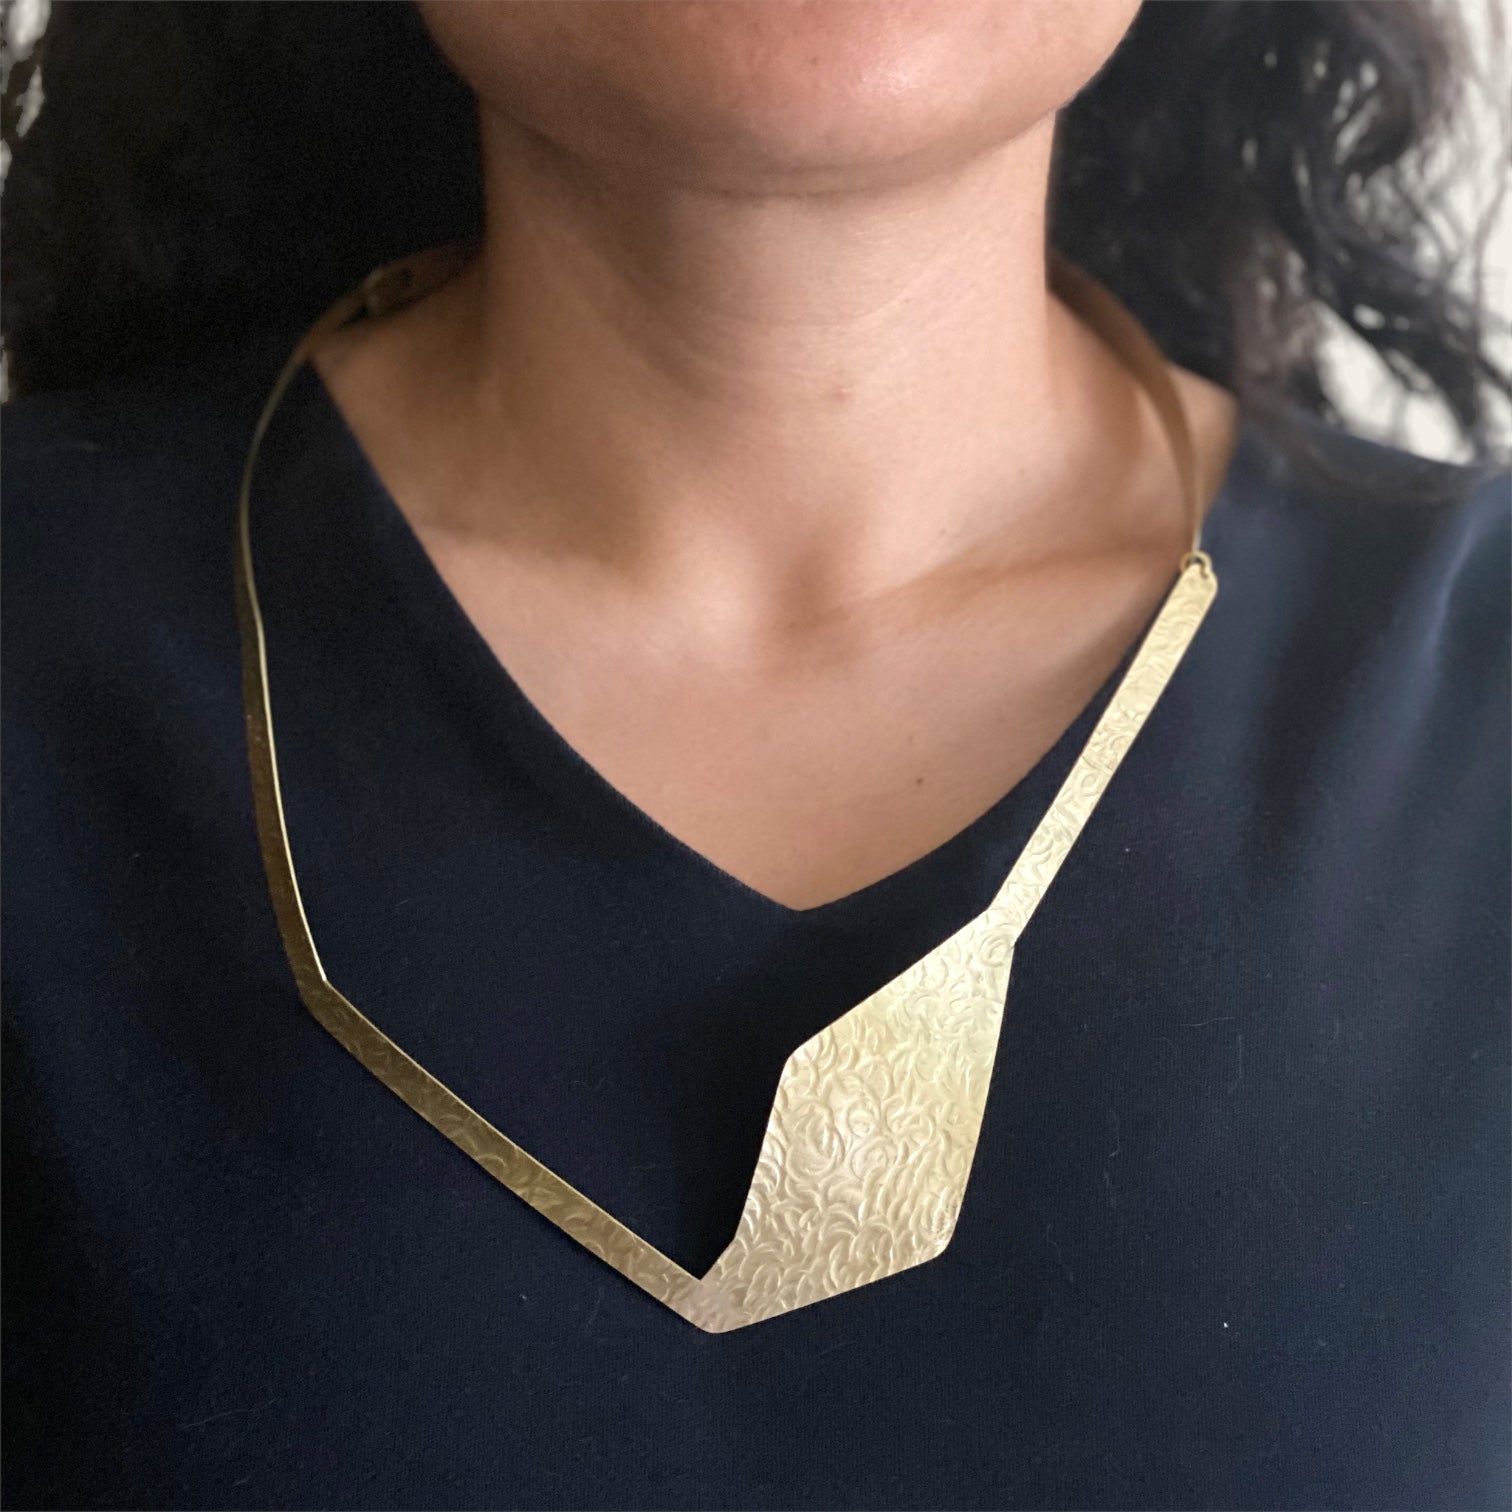 SHARE 4 Flat Angular Contemporary Necklace from the FIGURE Collection